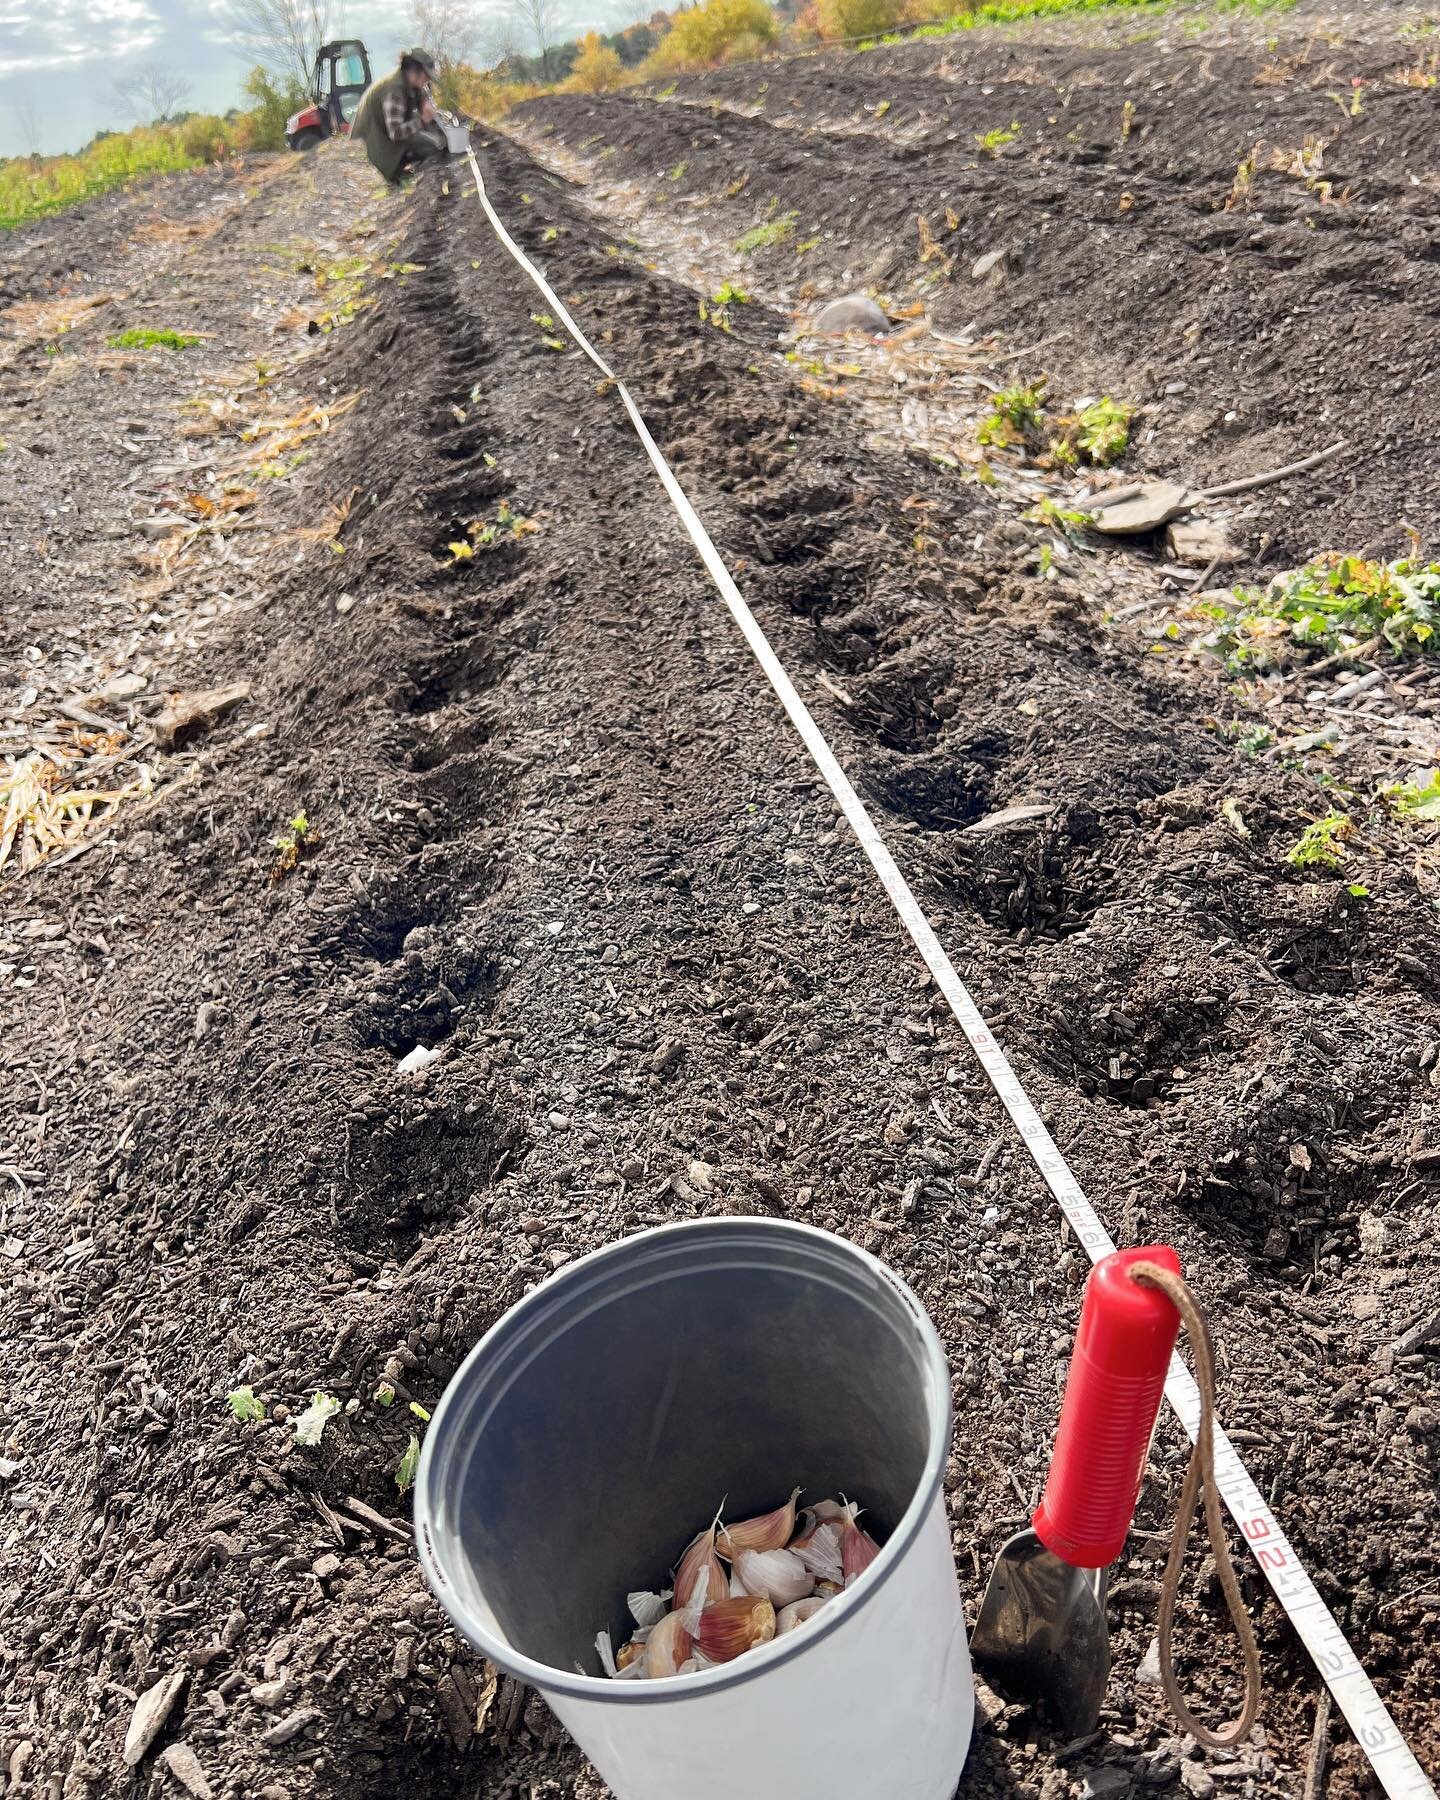 1200&rsquo; of garlic got planted in record time  yesterday. Onions and shallots are in the ground, ready to hibernate over the winter. There are a few more crops to be harvested in the field; then , that&rsquo;s a wrap on the 2022 growing season for